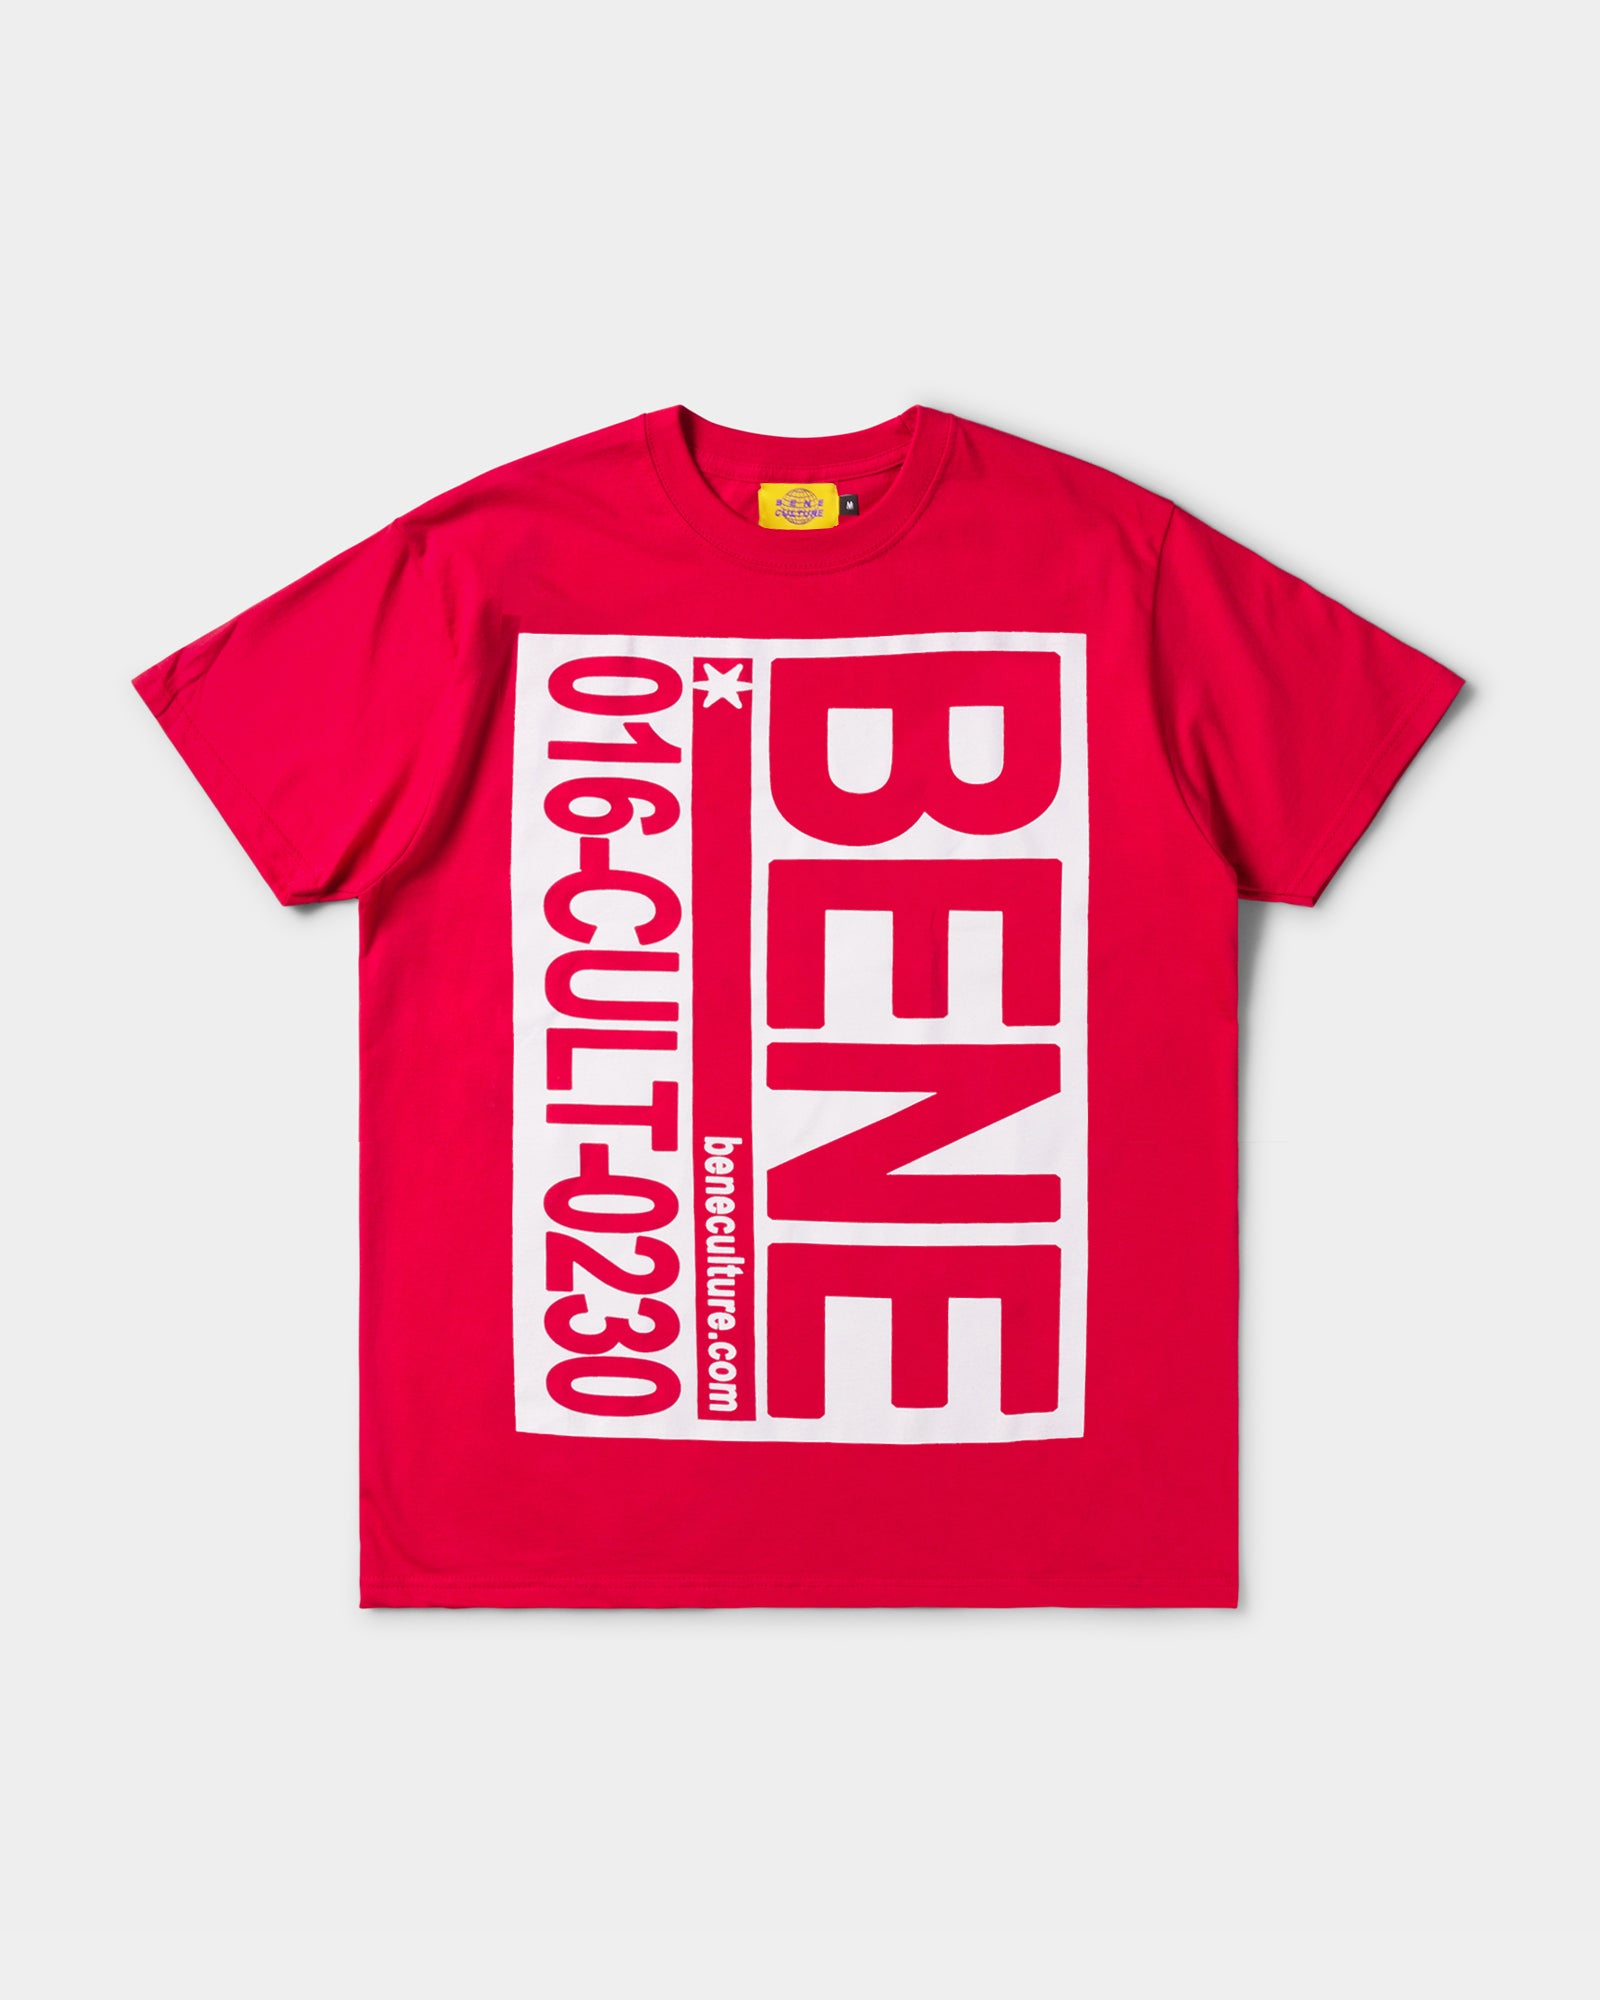 Cult T-Shirt (Red)